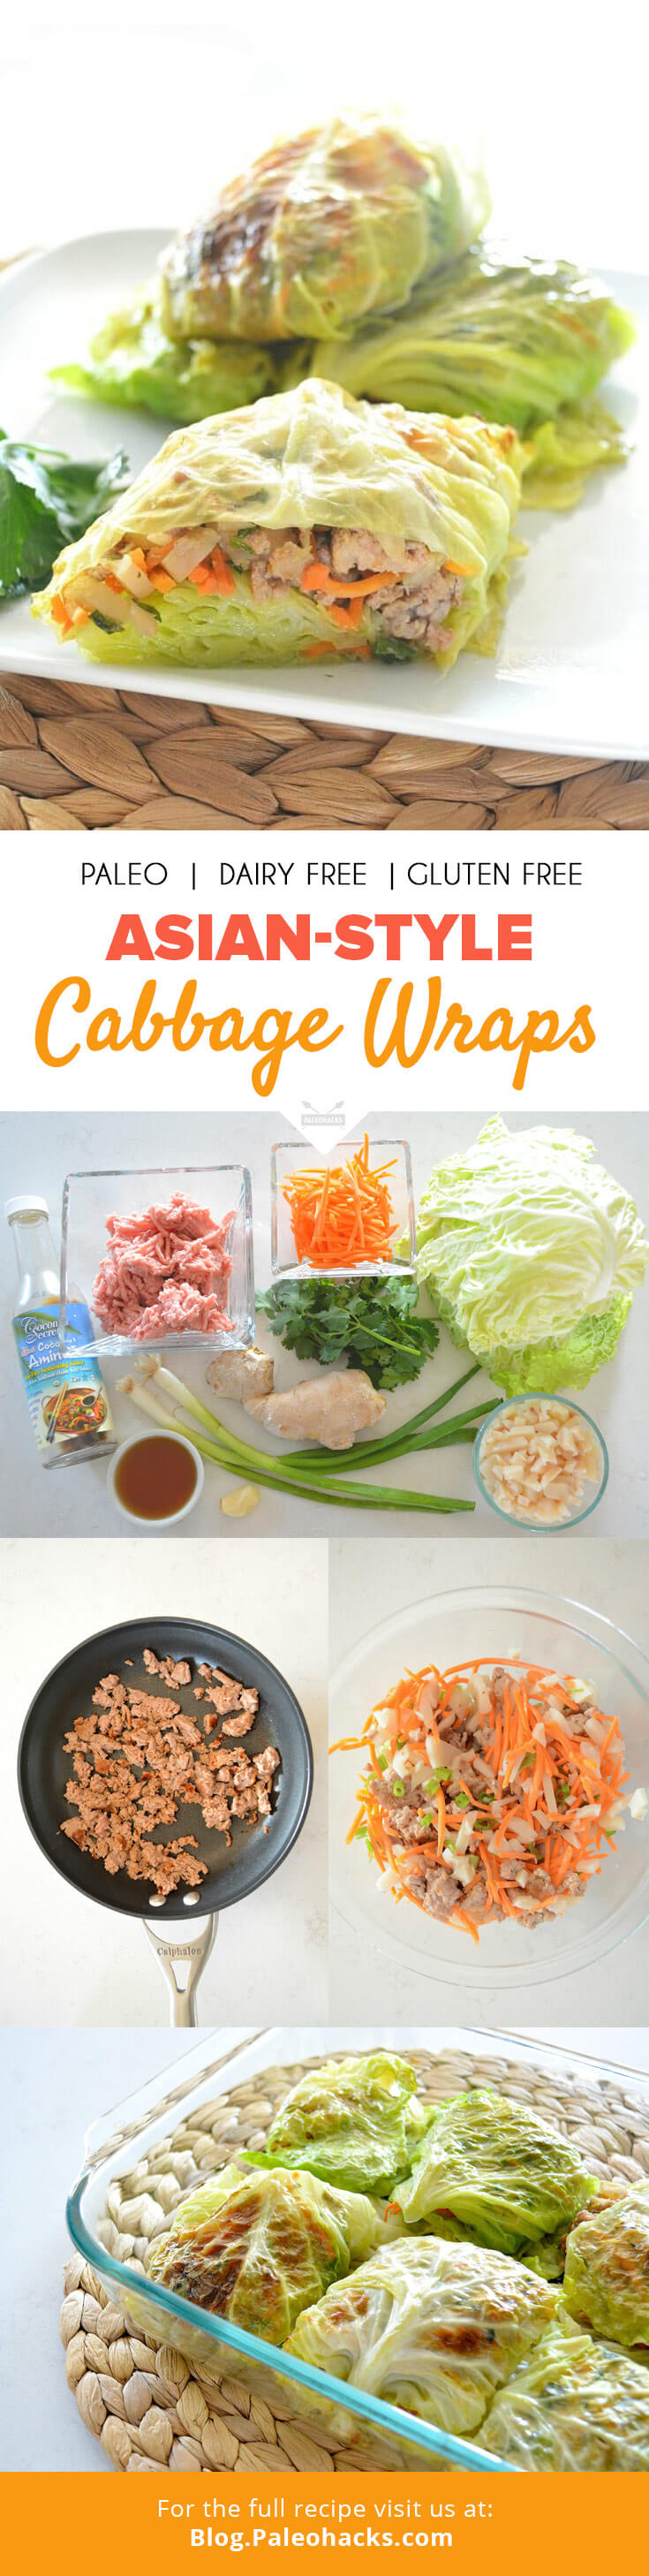 Stuffed cabbage wraps get an Asian-inspired twist in this recipe full of fresh ingredients. This recipe makes a large batch for a Paleo-style crowd pleaser.